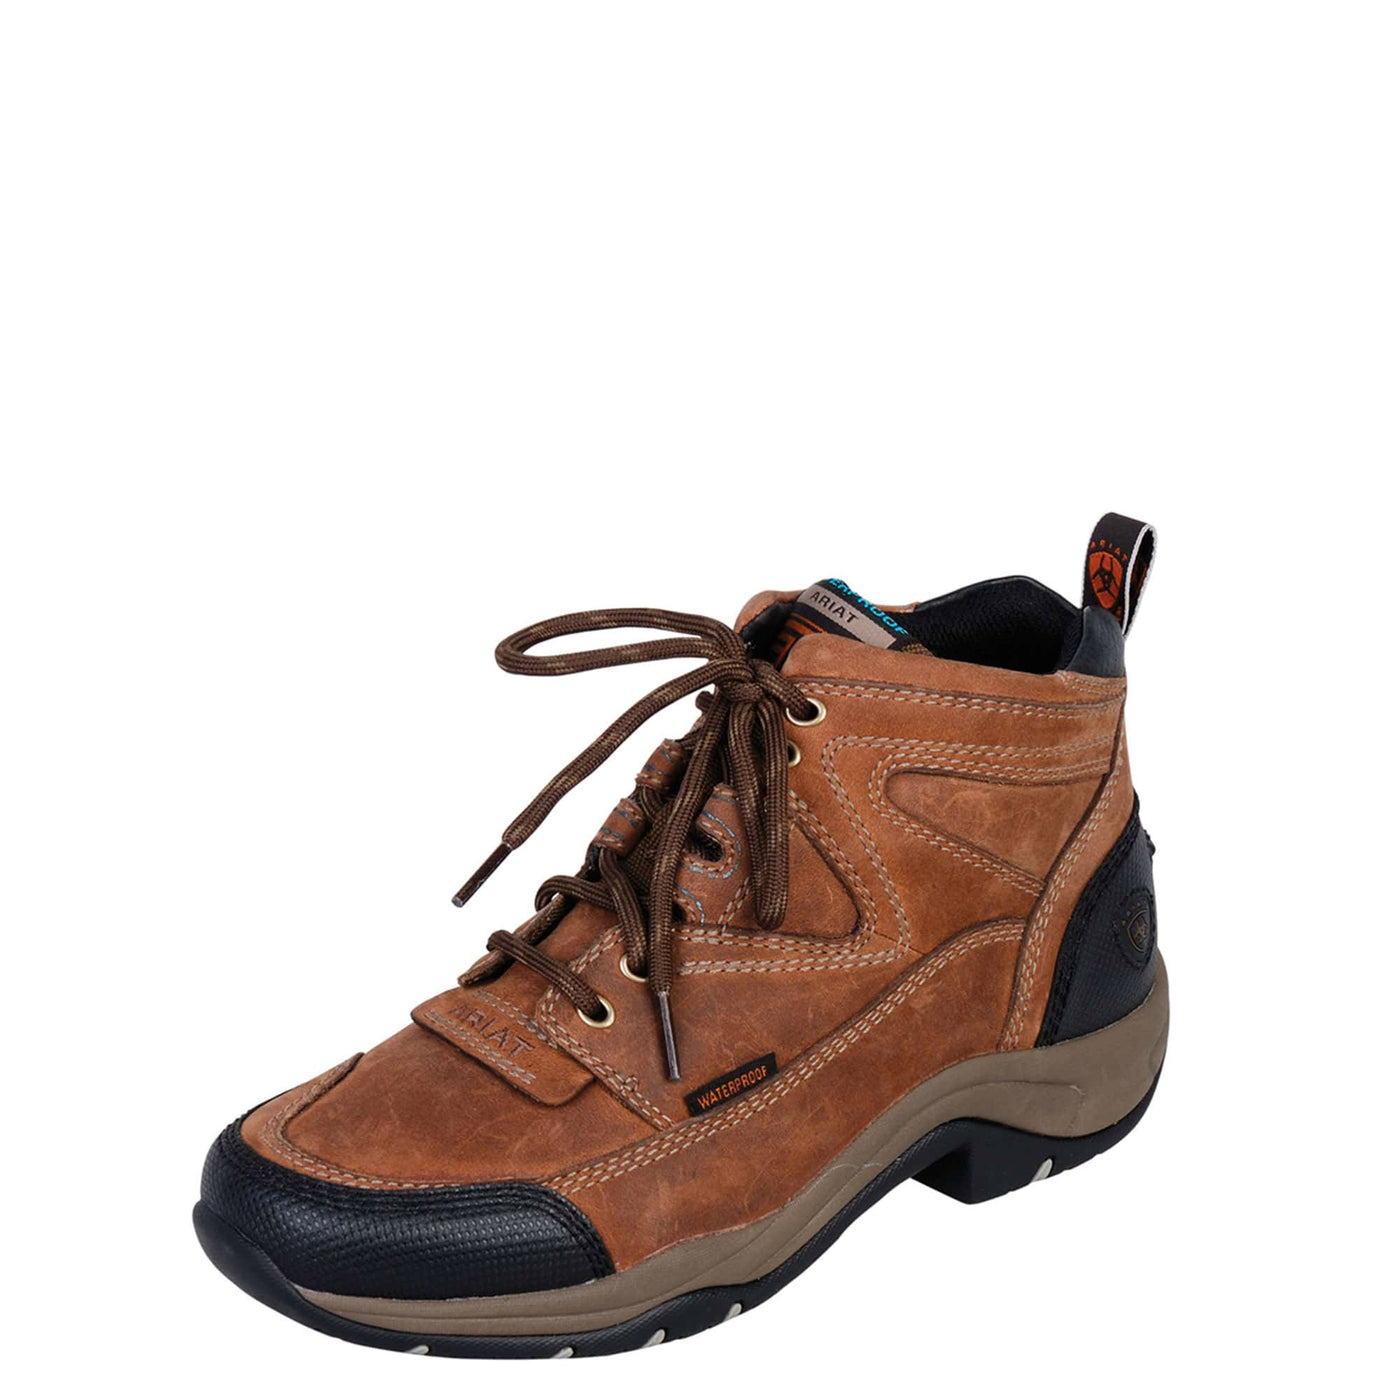 Ariat | Women's Duraterrain H2O Distressed Brown - Outback Traders Australia